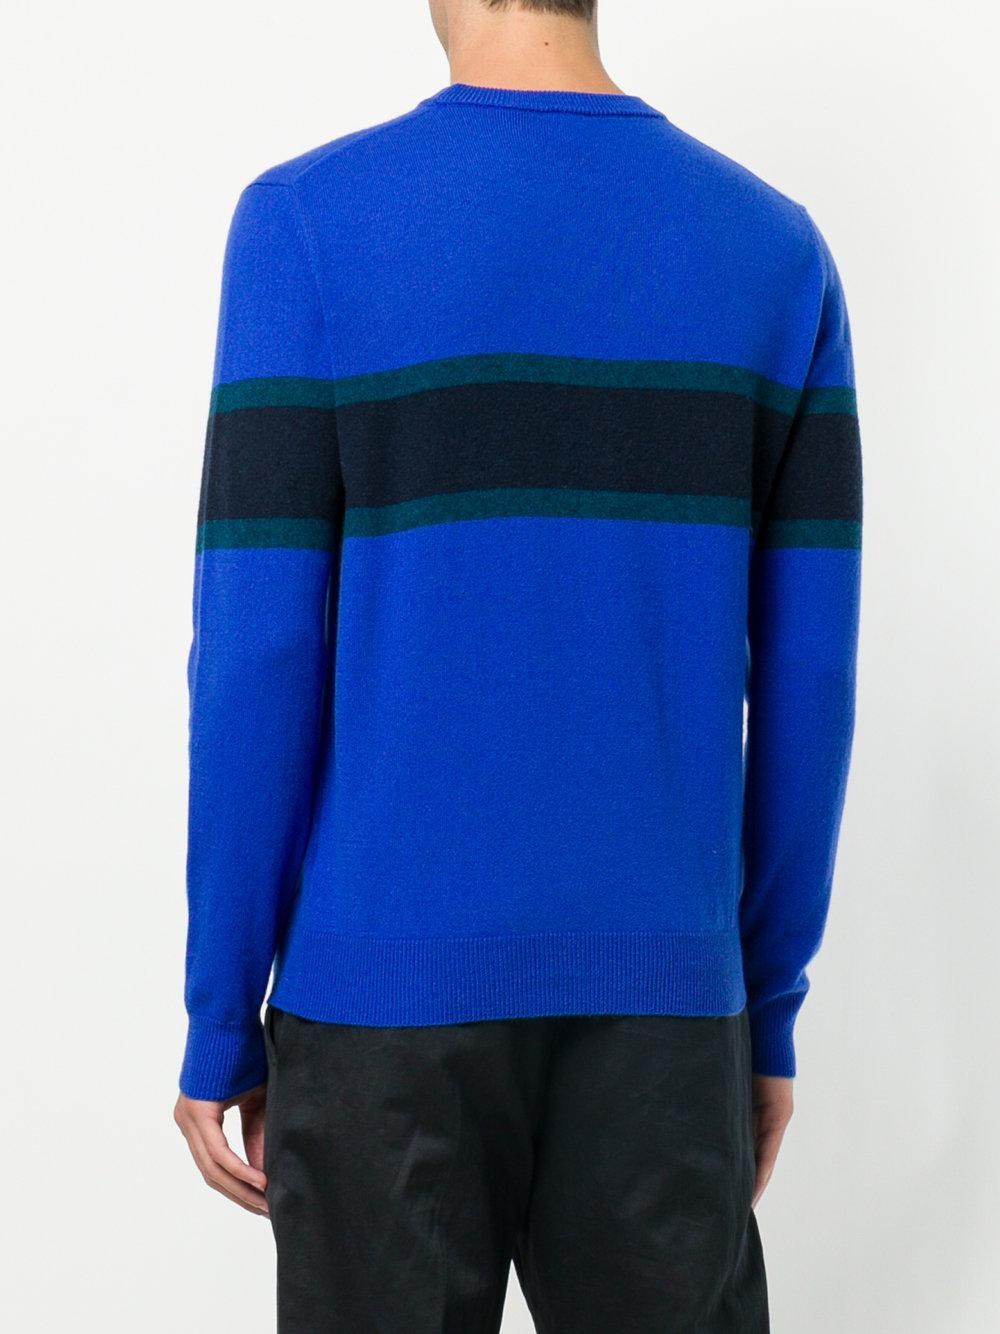 Lyst - Paul Smith Striped Chest Jumper in Blue for Men